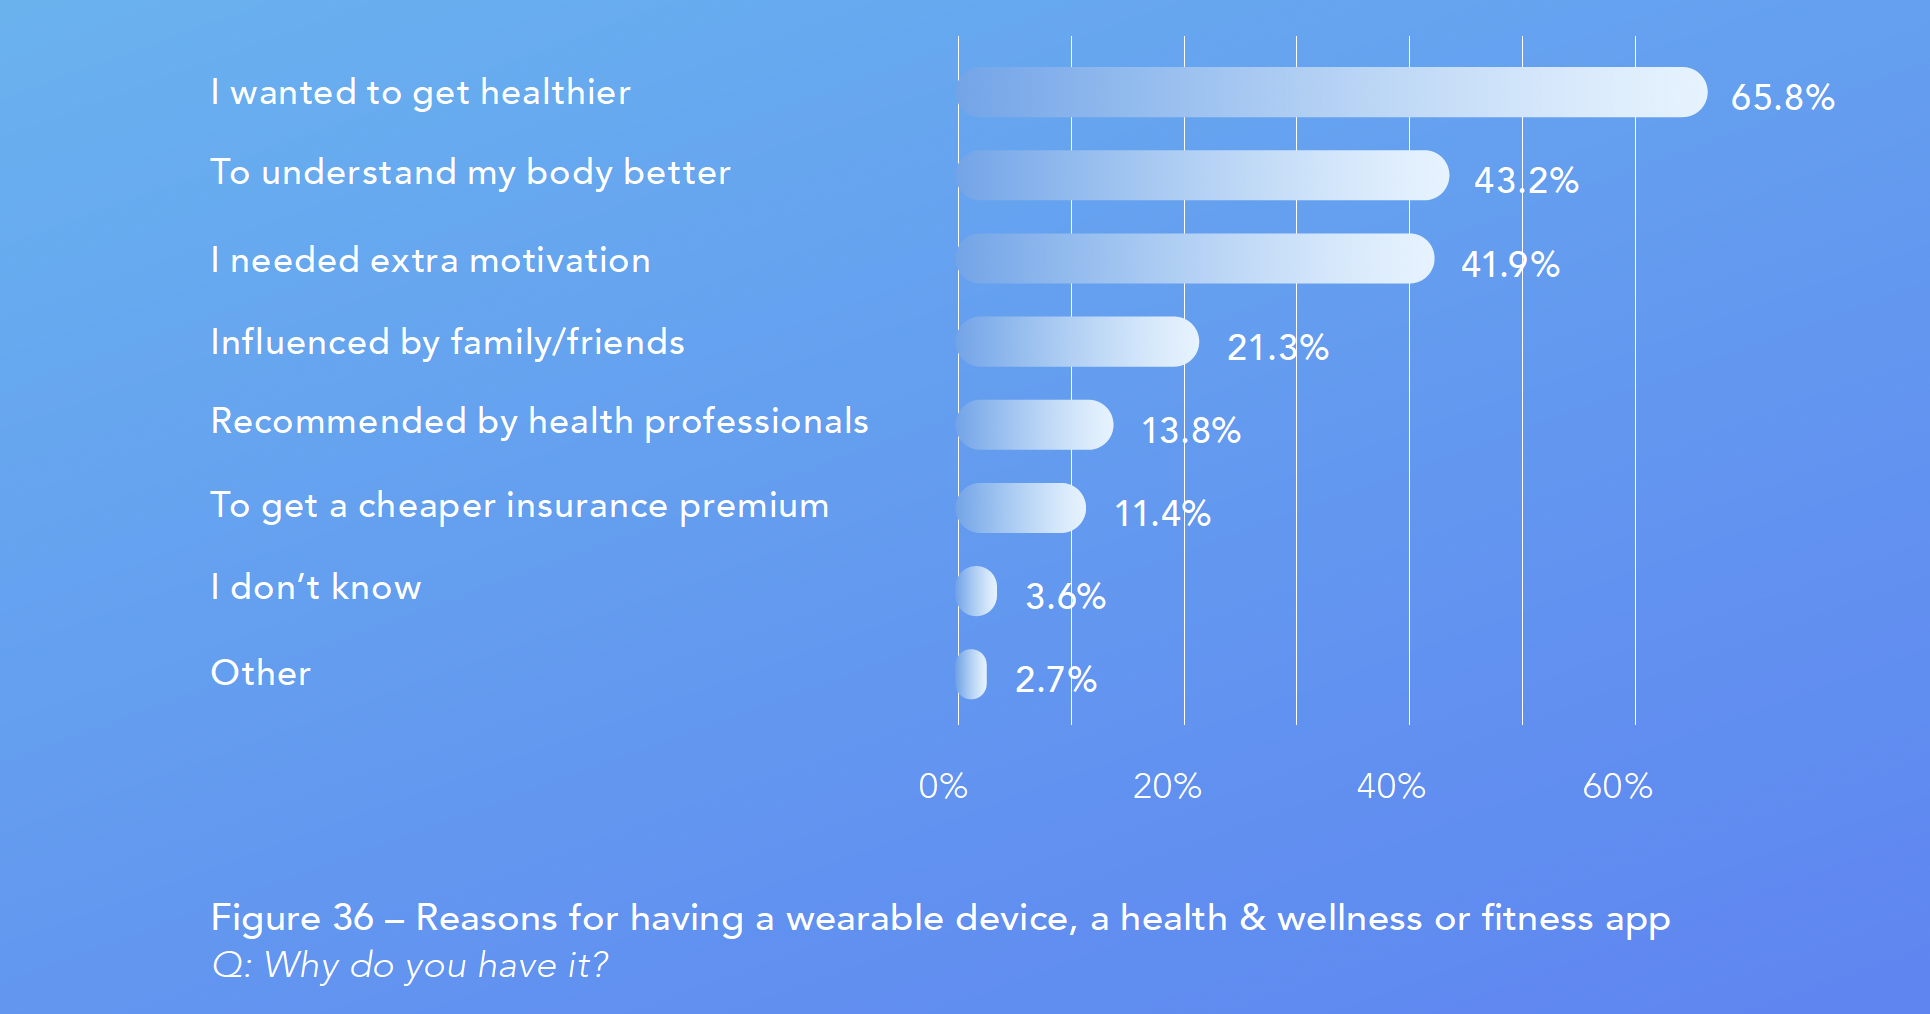 Figure 36 – Reasons for having a wearable device, a health & wellness or fitness app